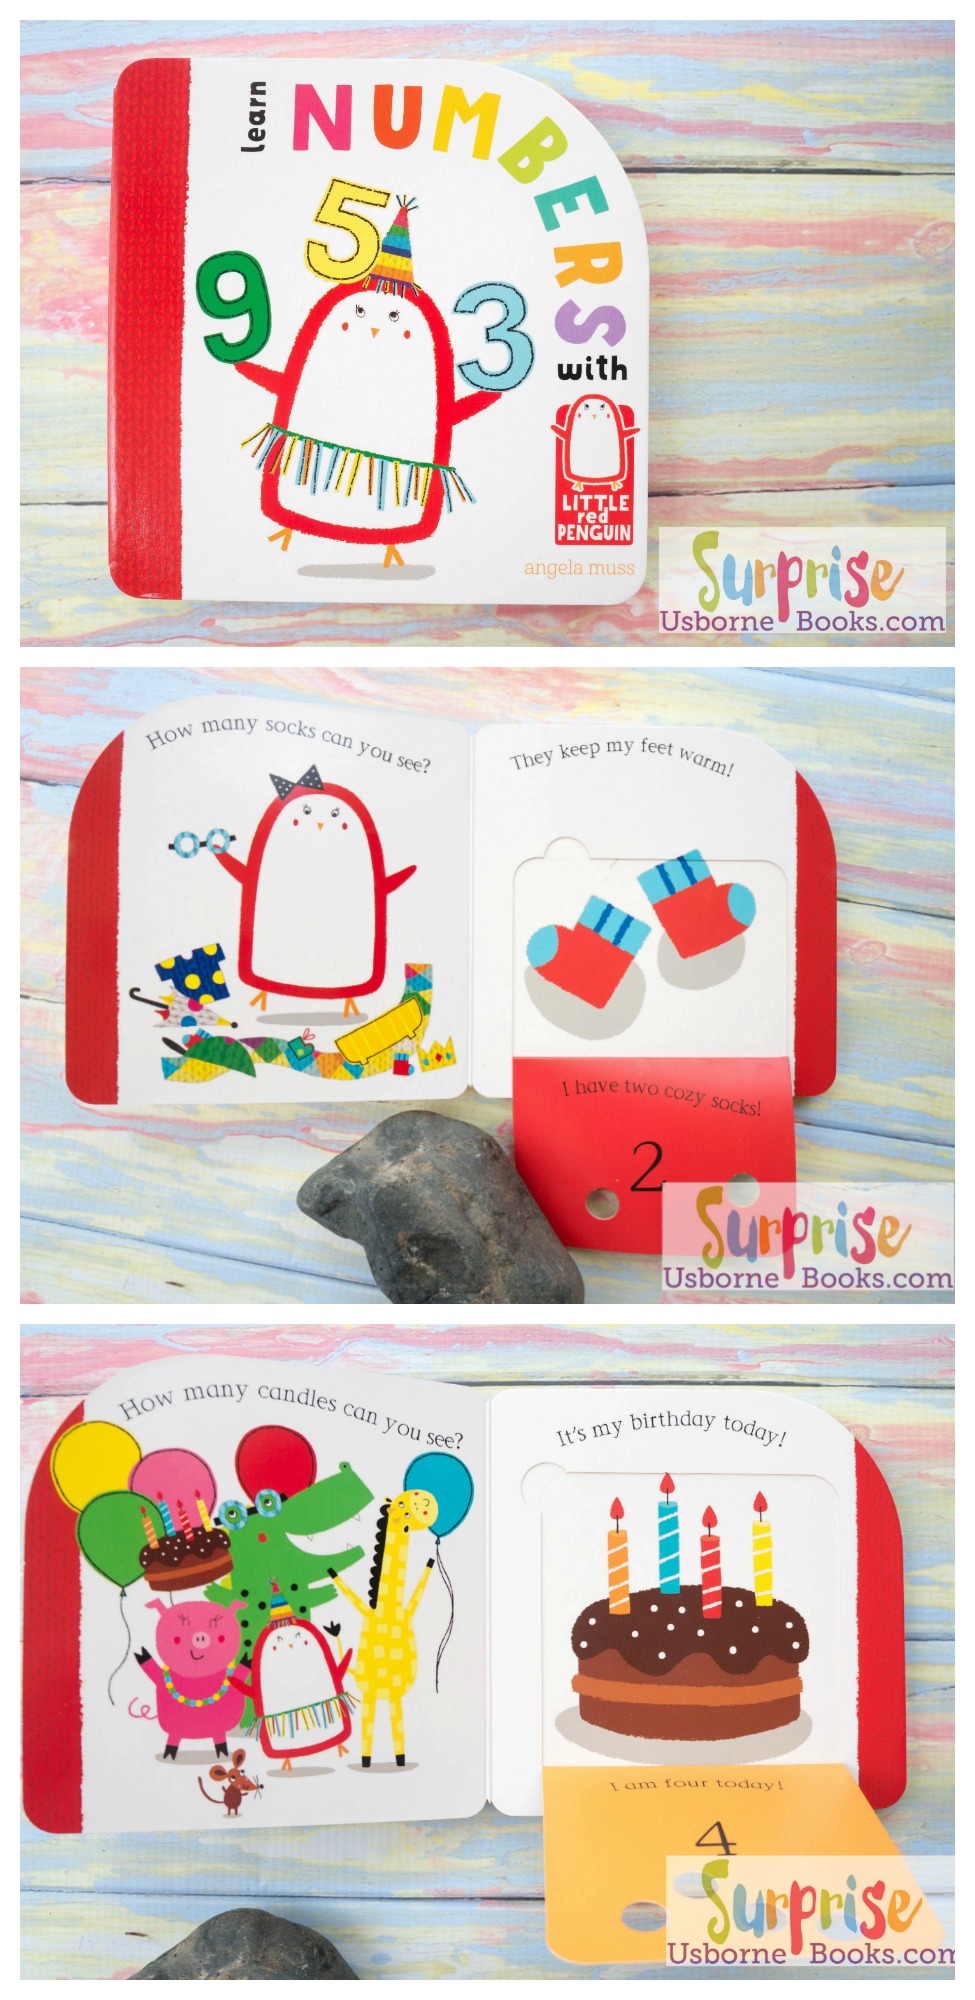 Little Red Penguin Learn Numbers - Surprise Usborne Books